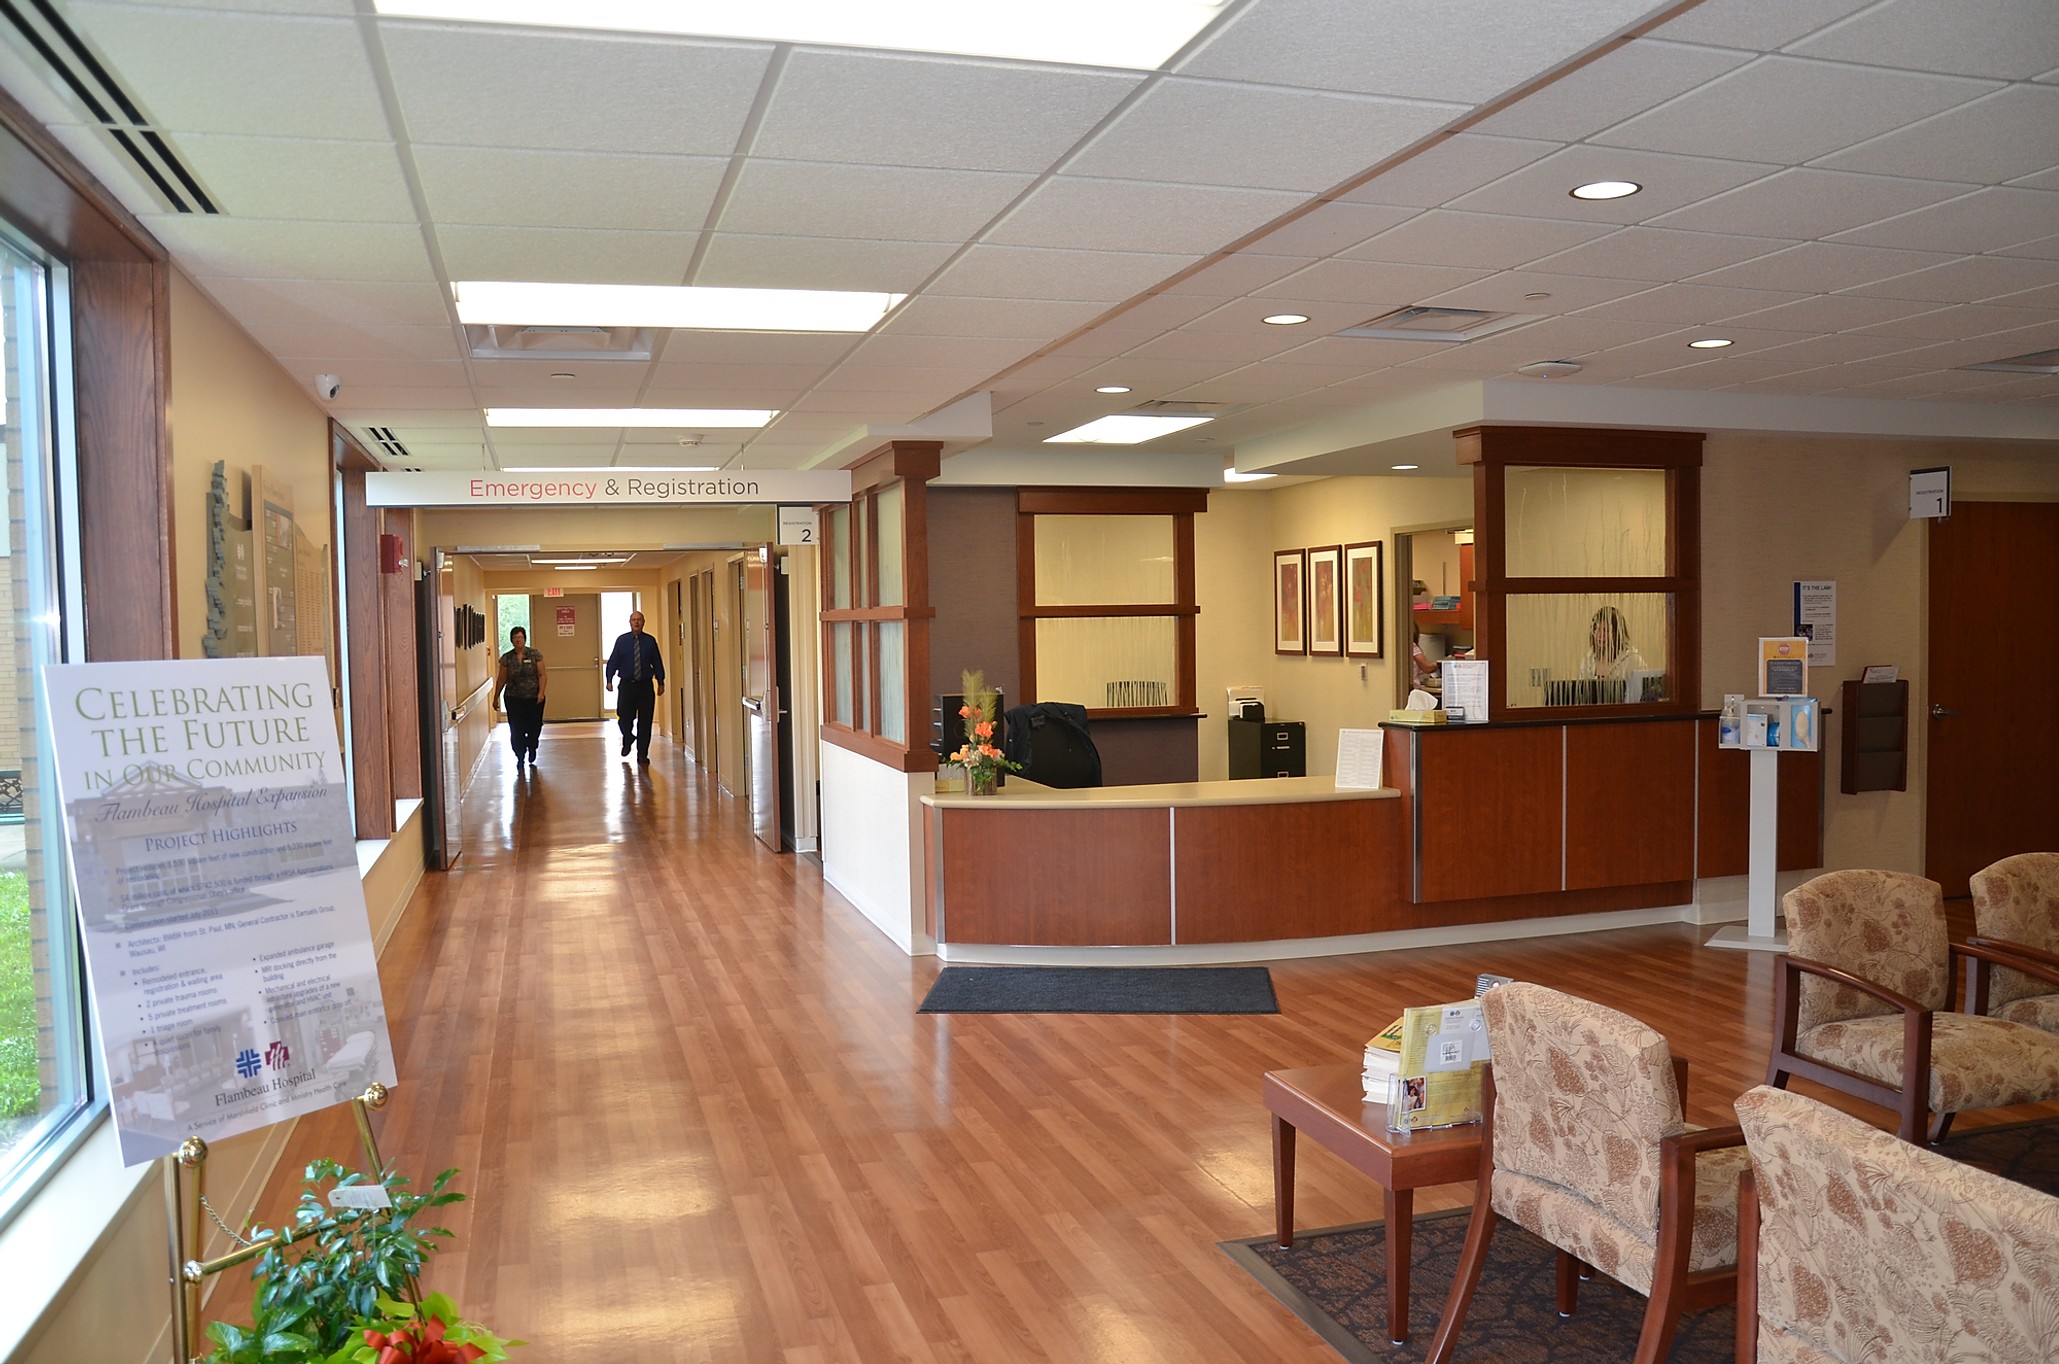 The Samuels Group does more than just provide the finishing touches to your facility.